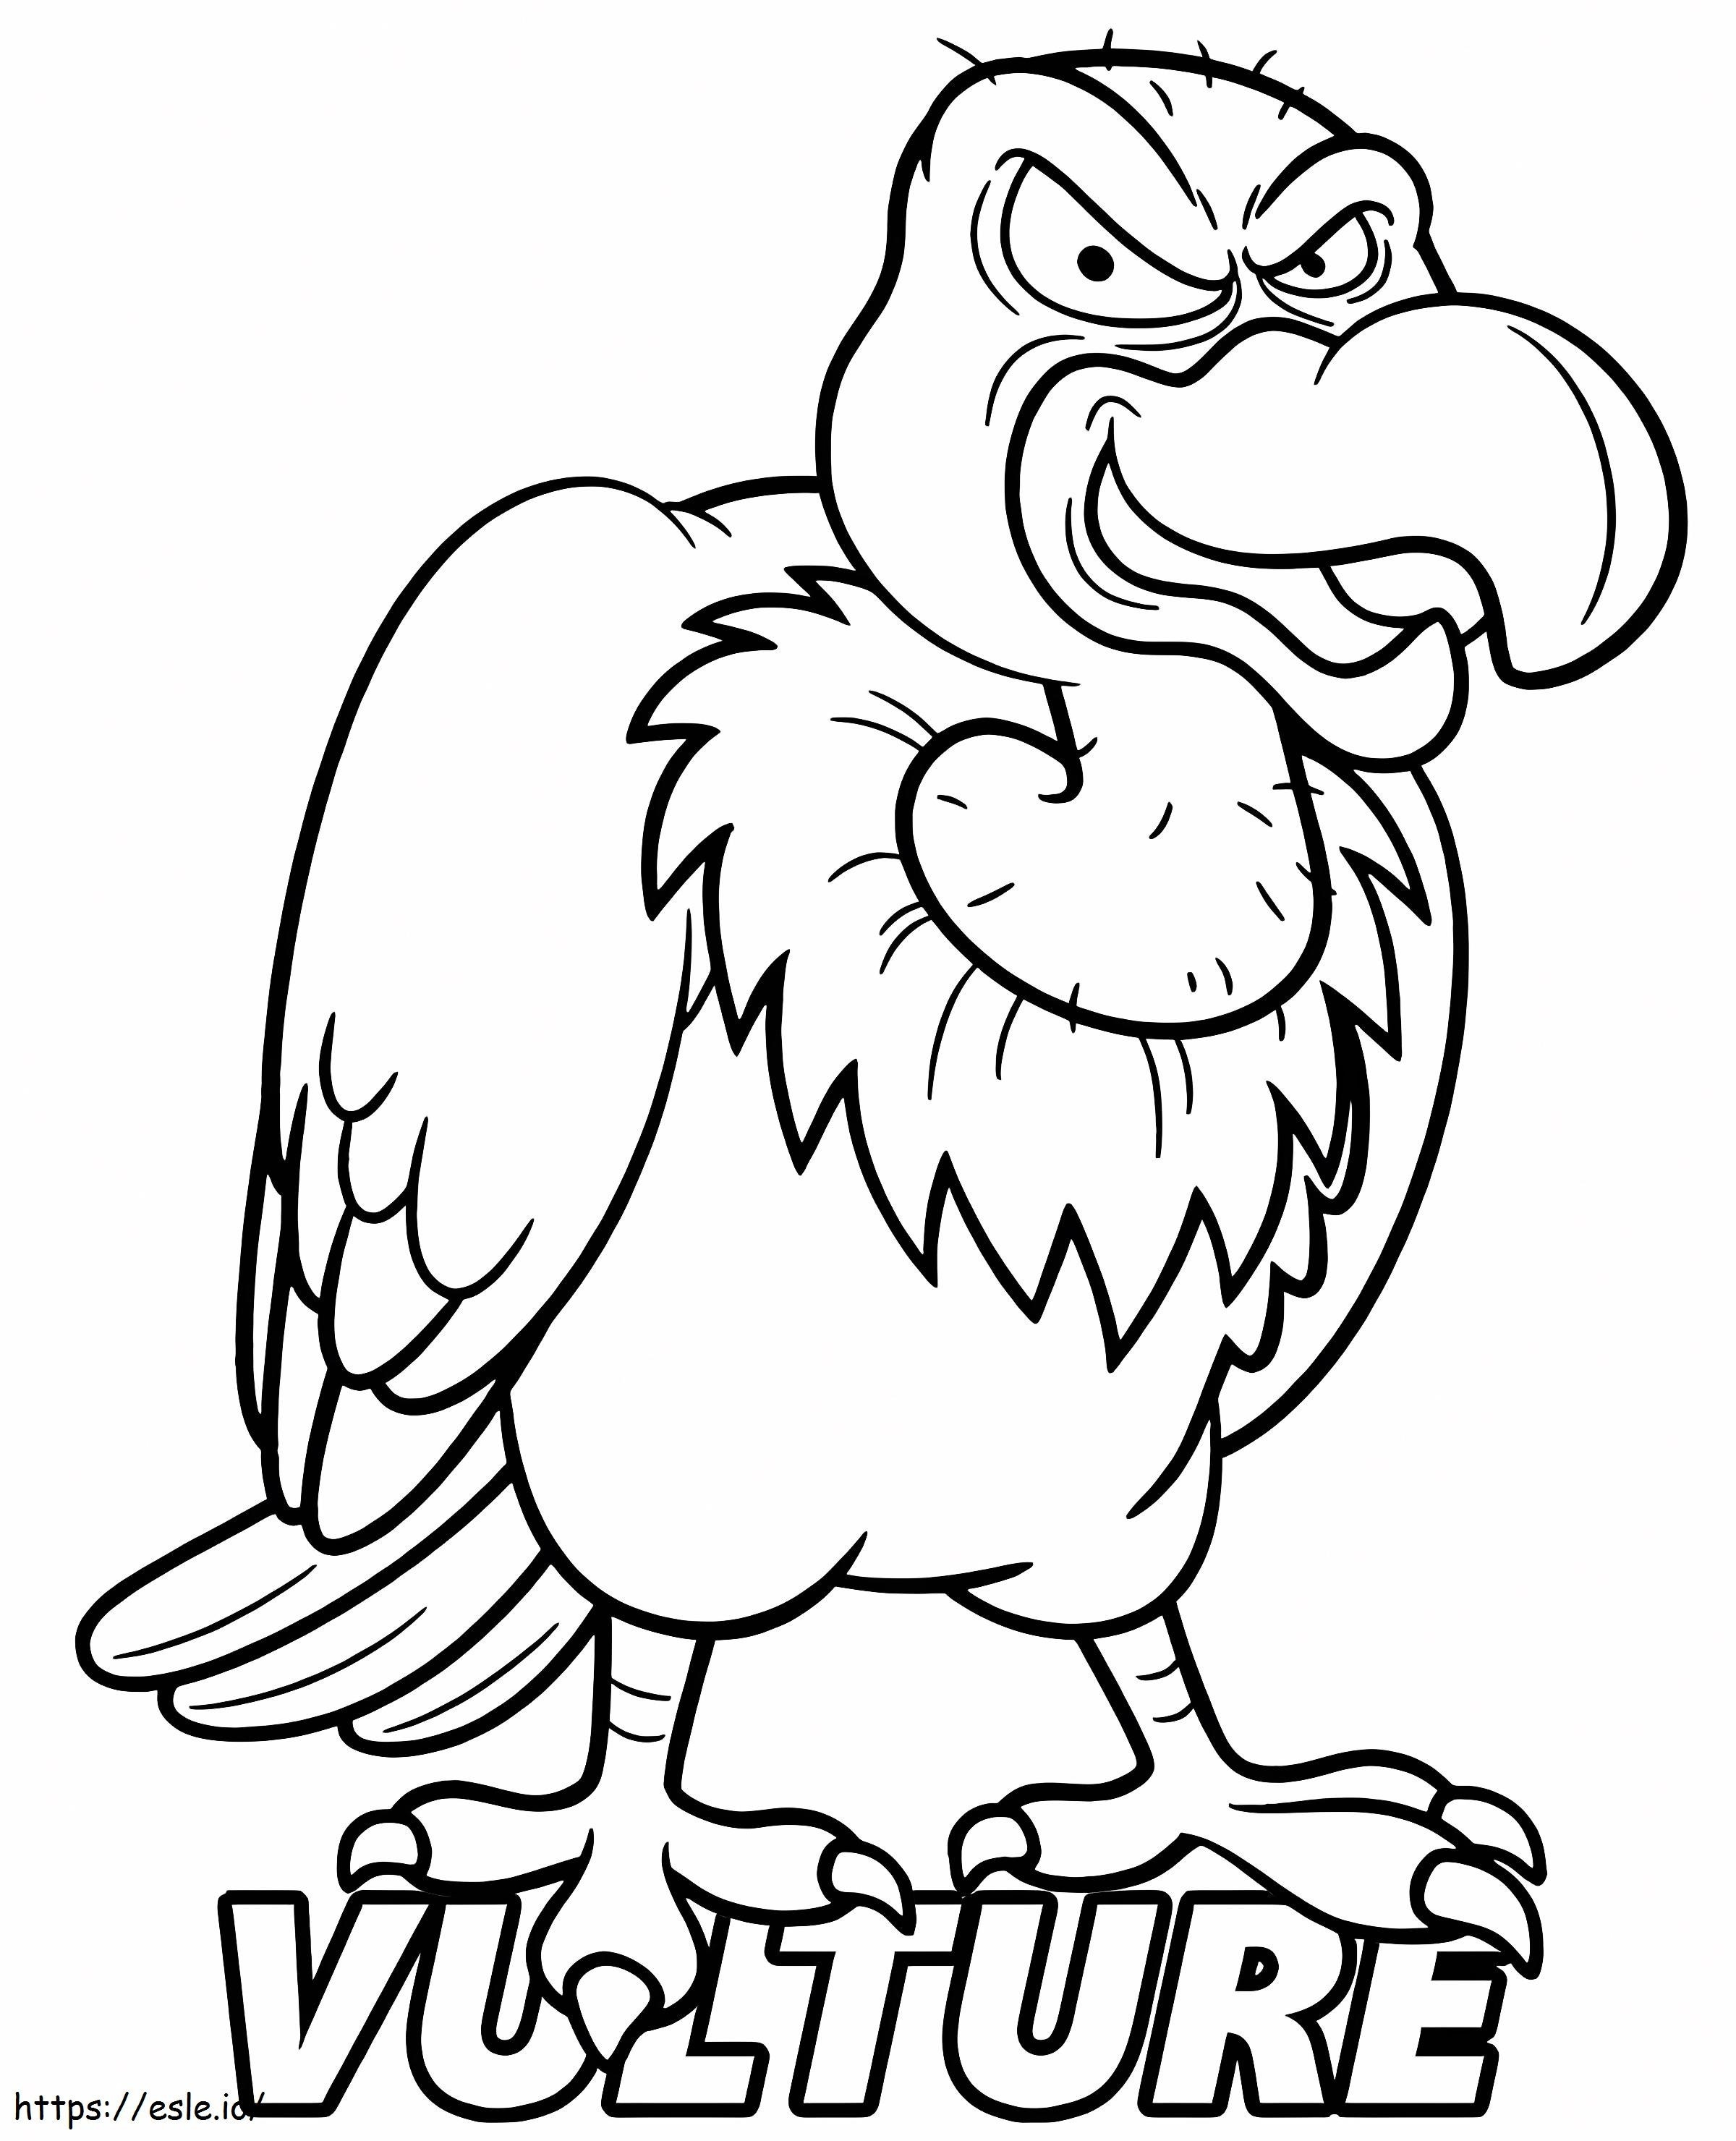 Angry Condor coloring page